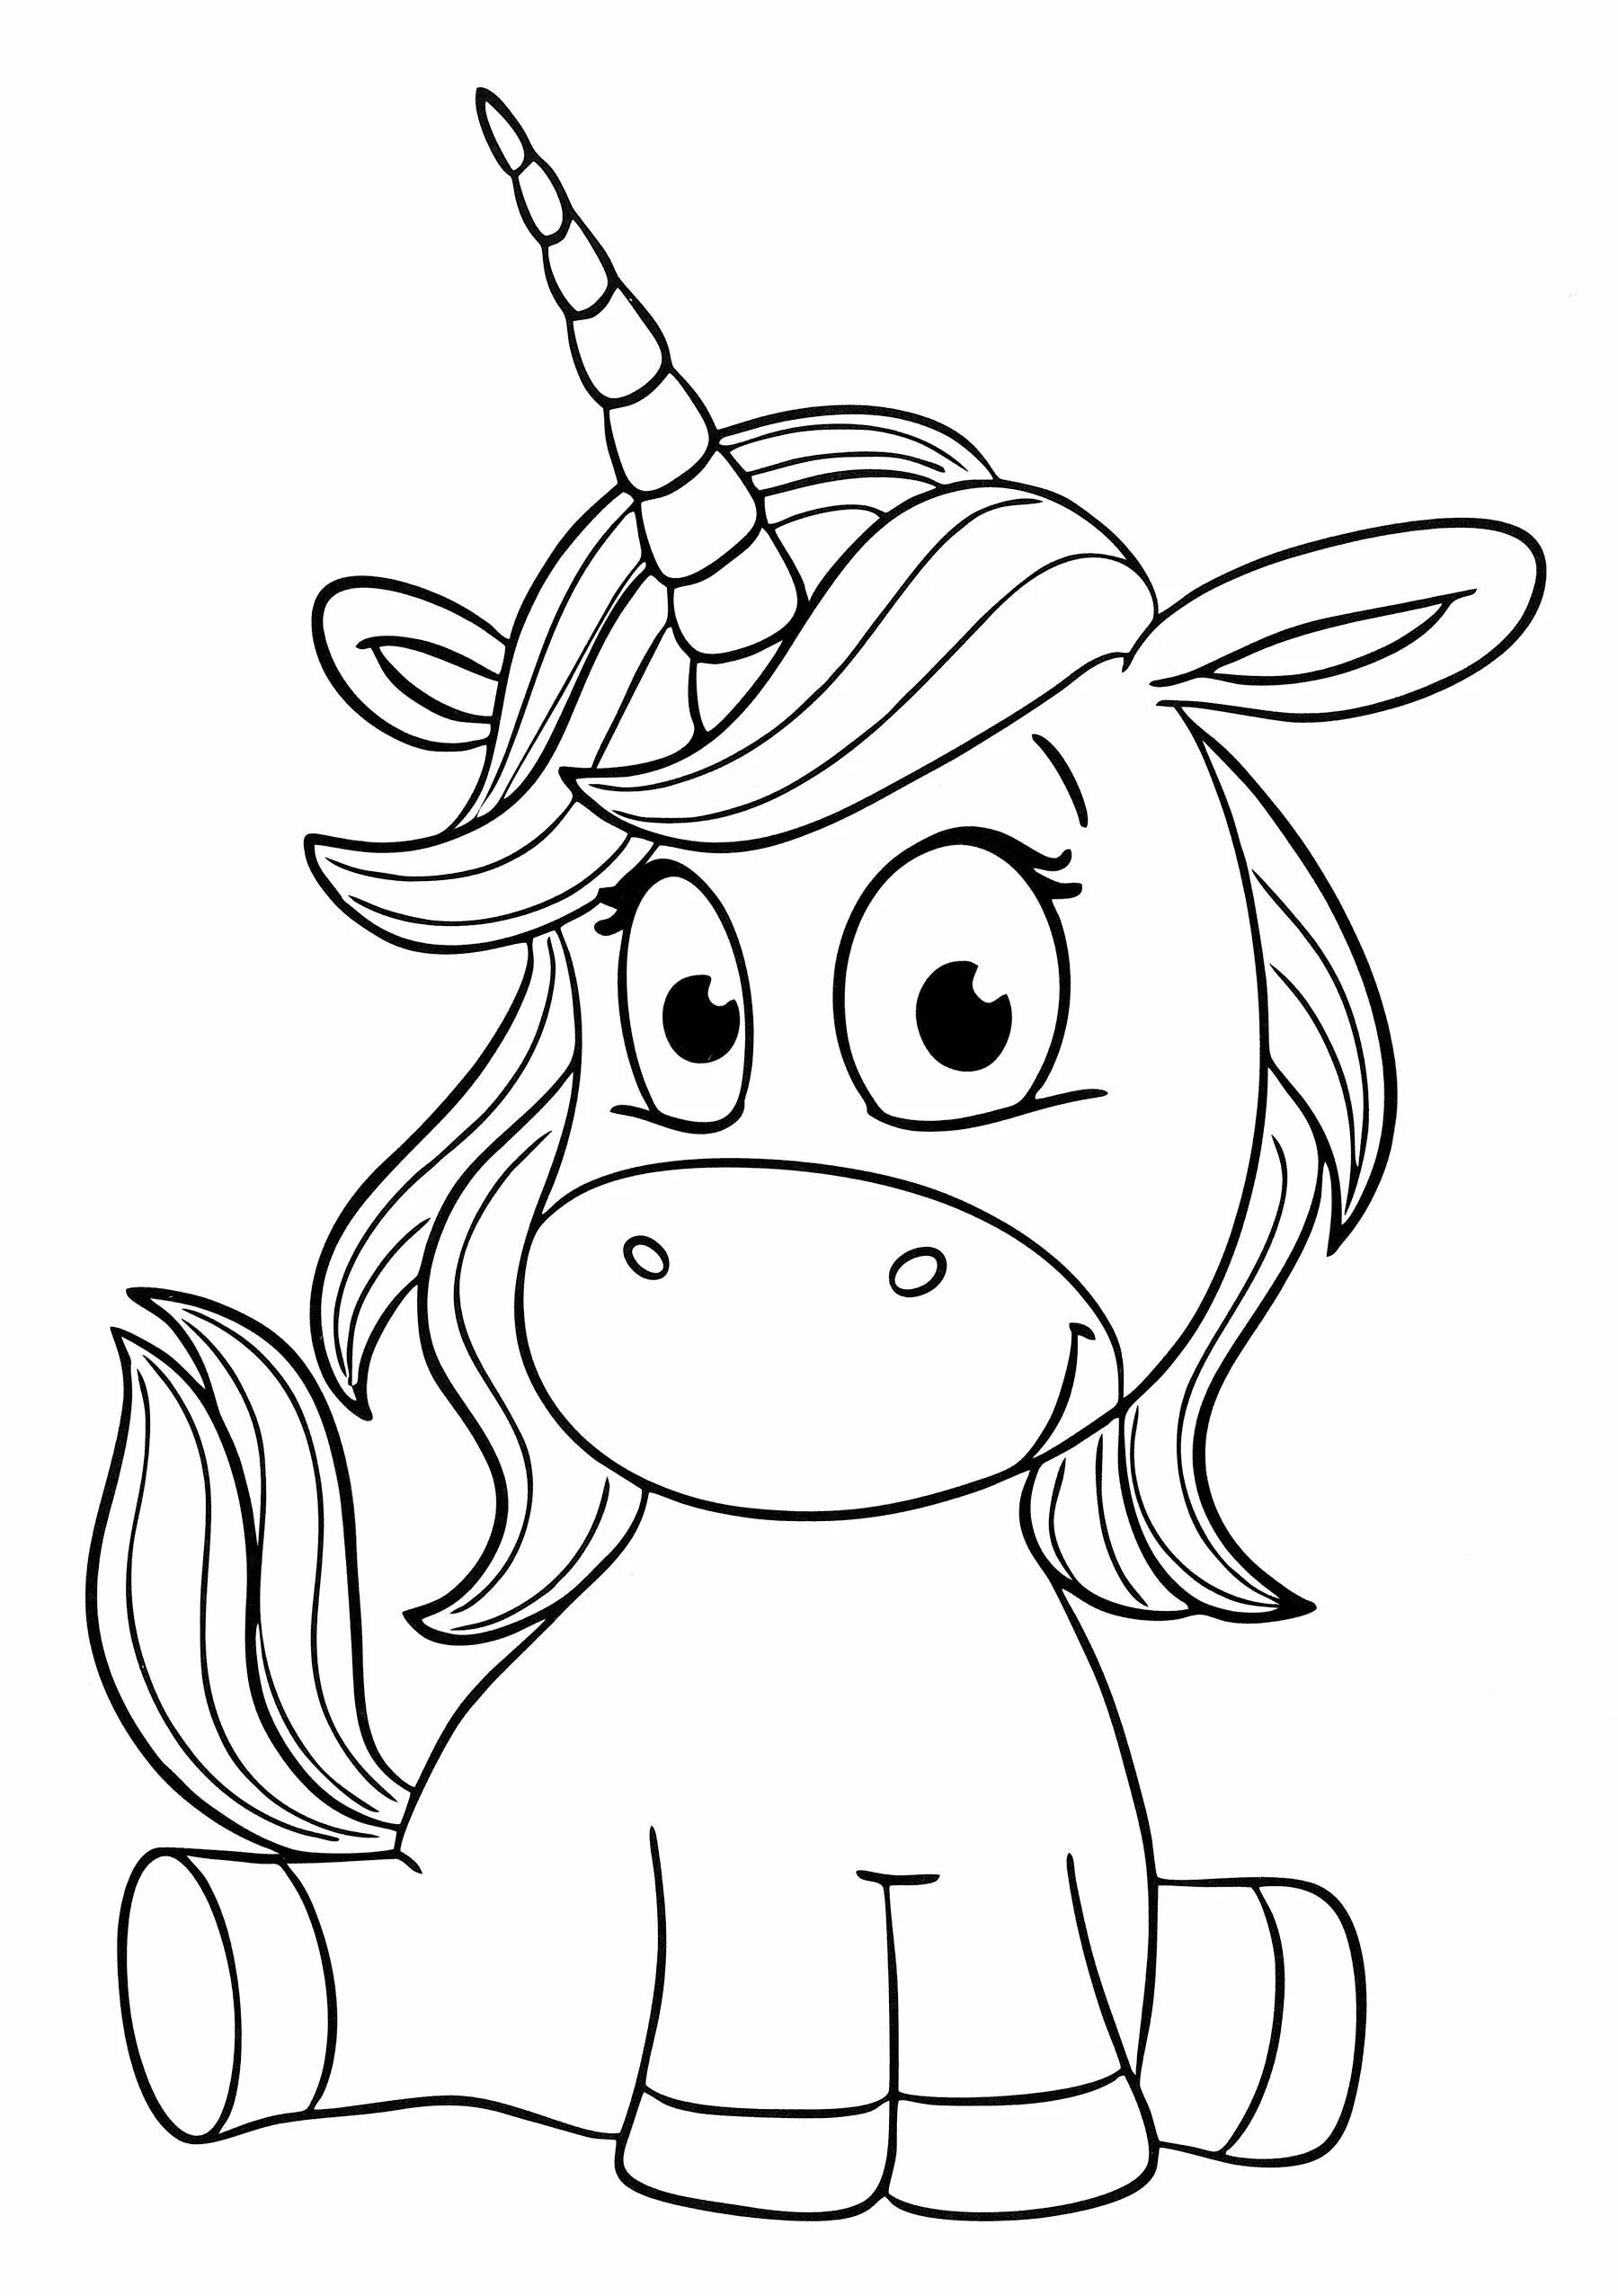 Unicorn drawing for kids #9